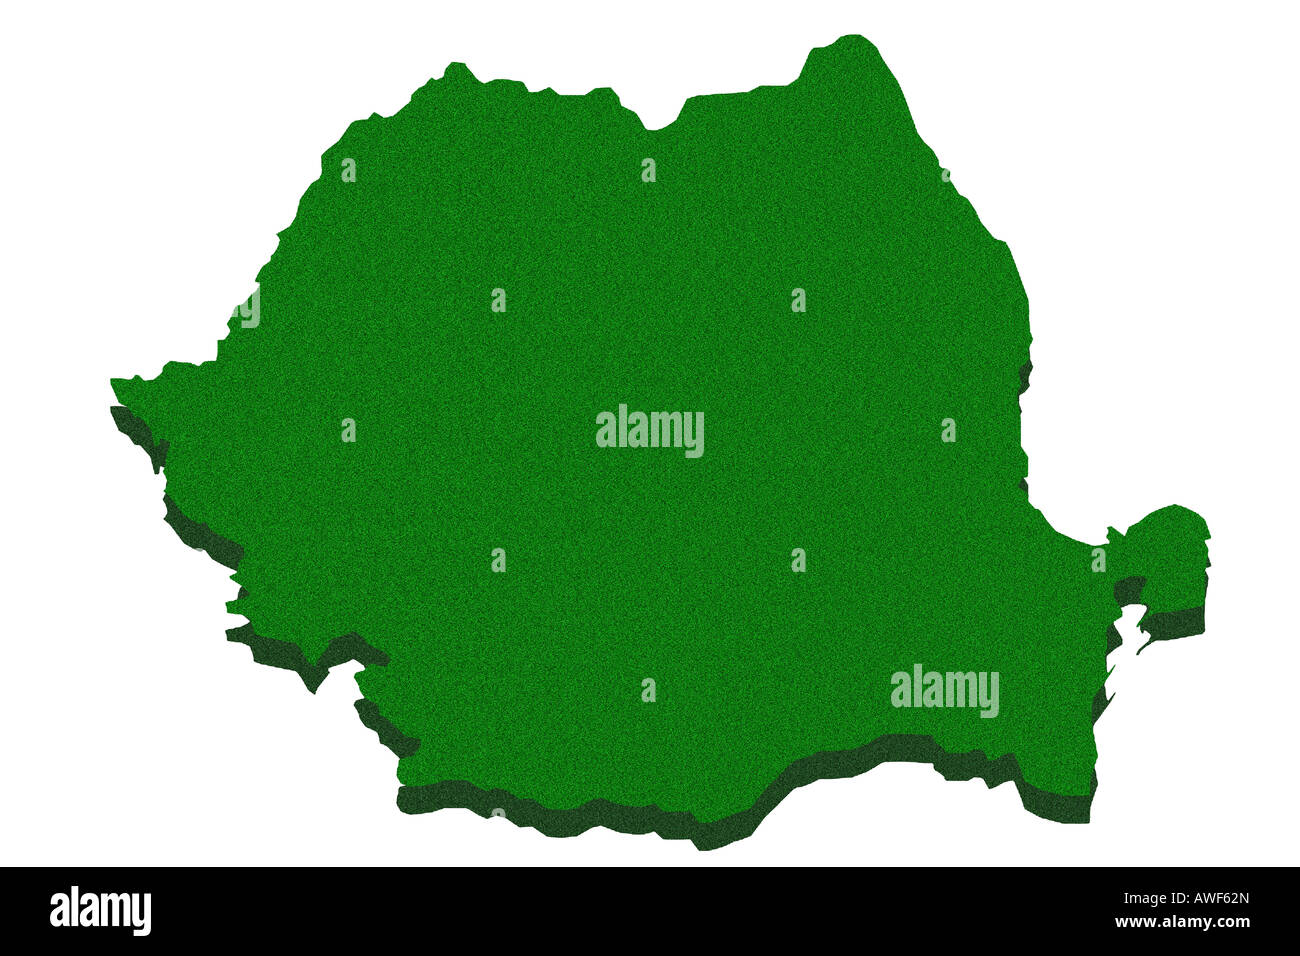 Outline map of Romania Stock Photo